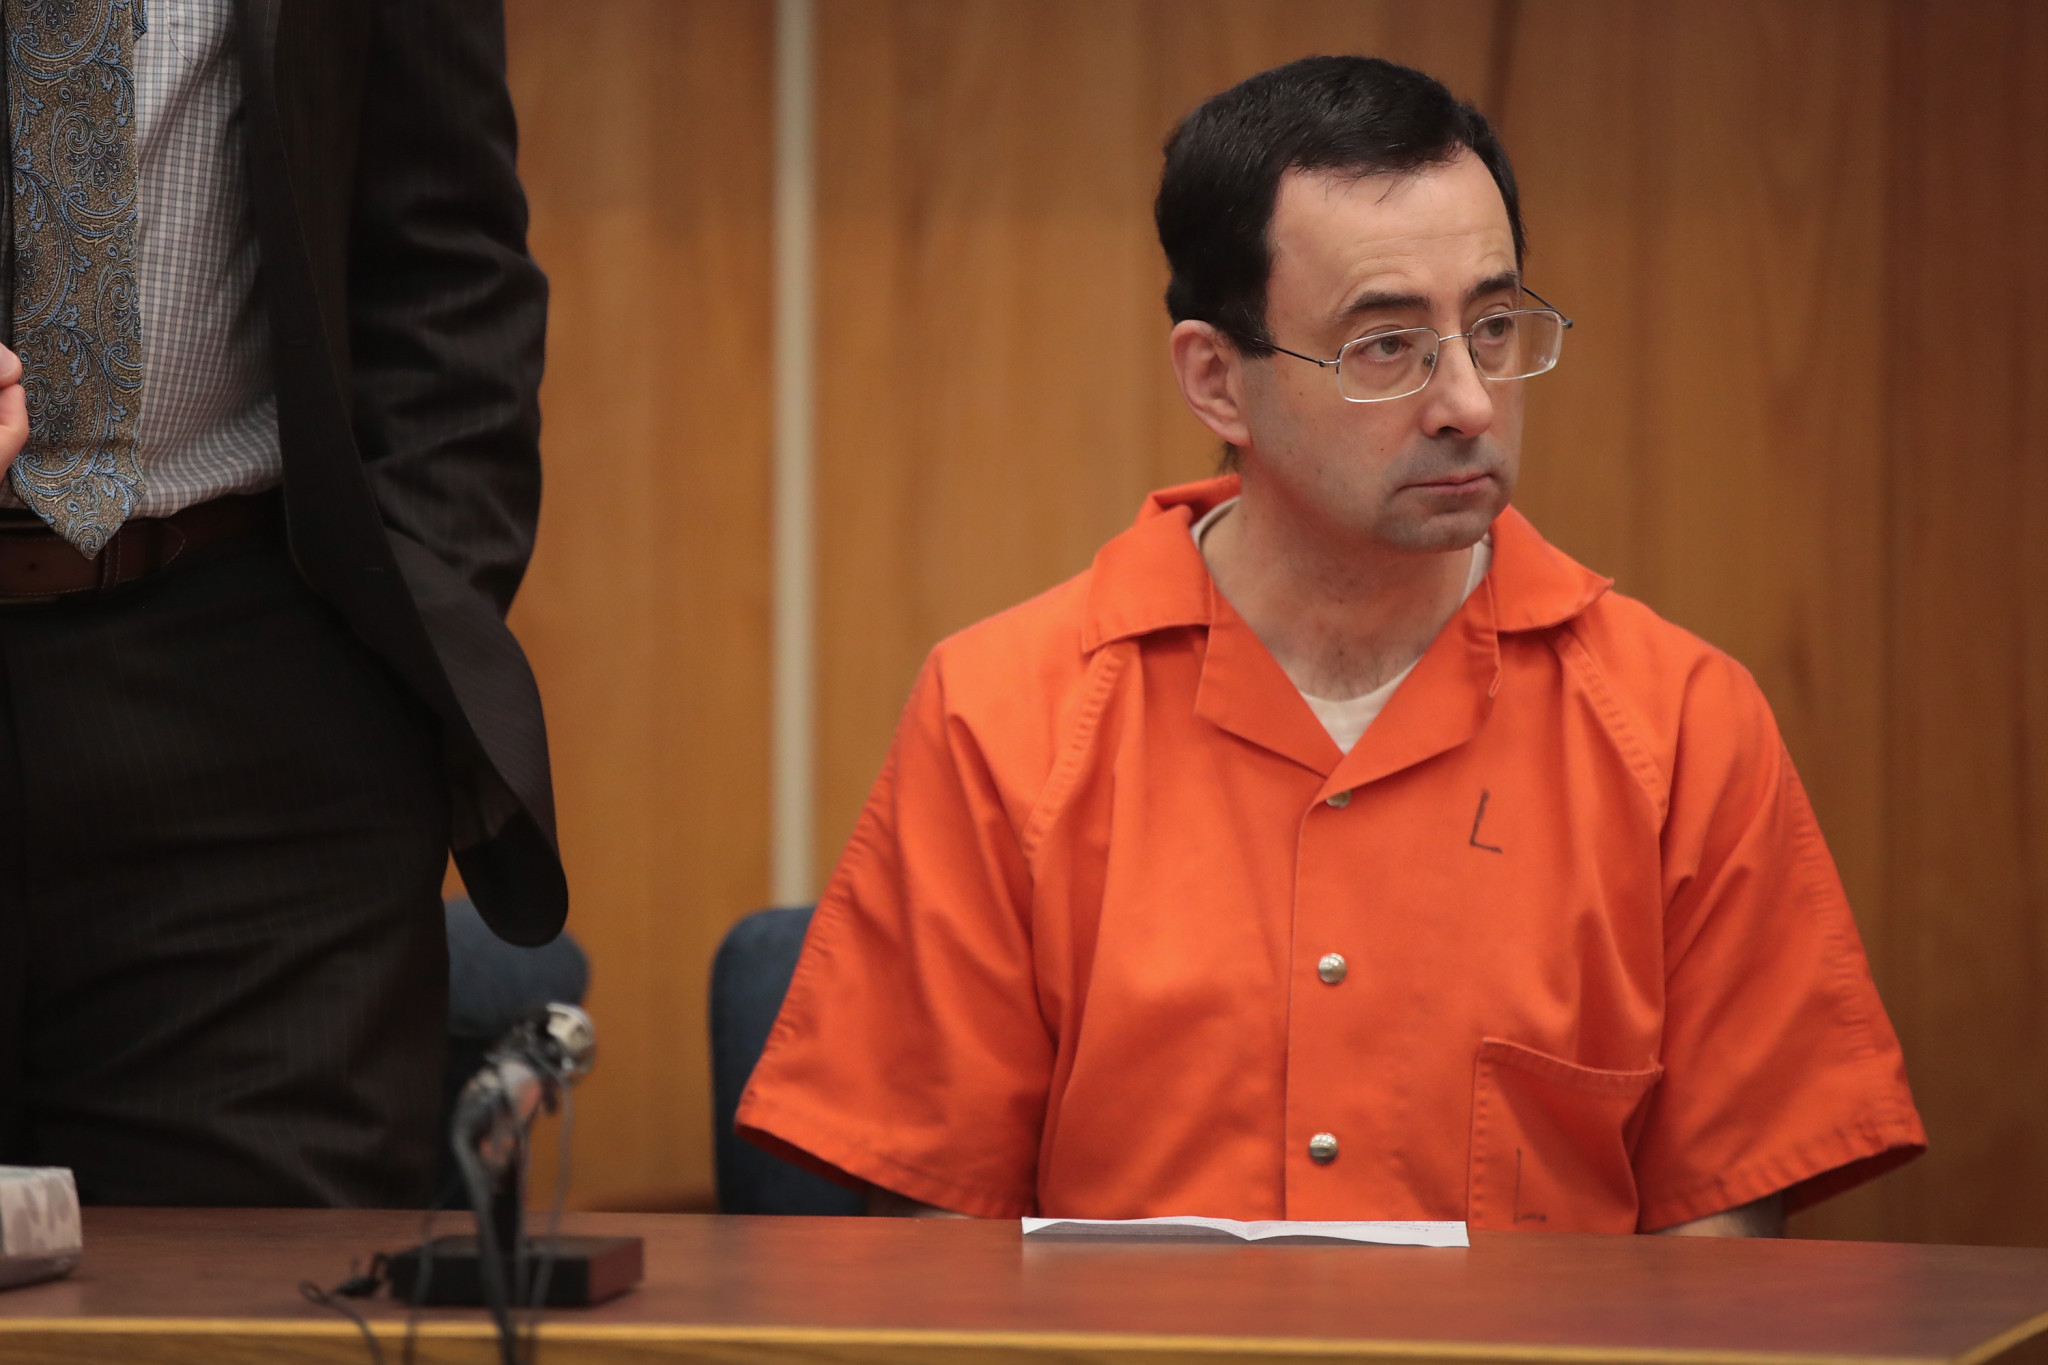 Former USA Gymnastics coach Larry Nassar was given an effective life sentence by a Michigan court for sexually abusing dozens of young female gymnasts entrusted to his care ©Getty Images